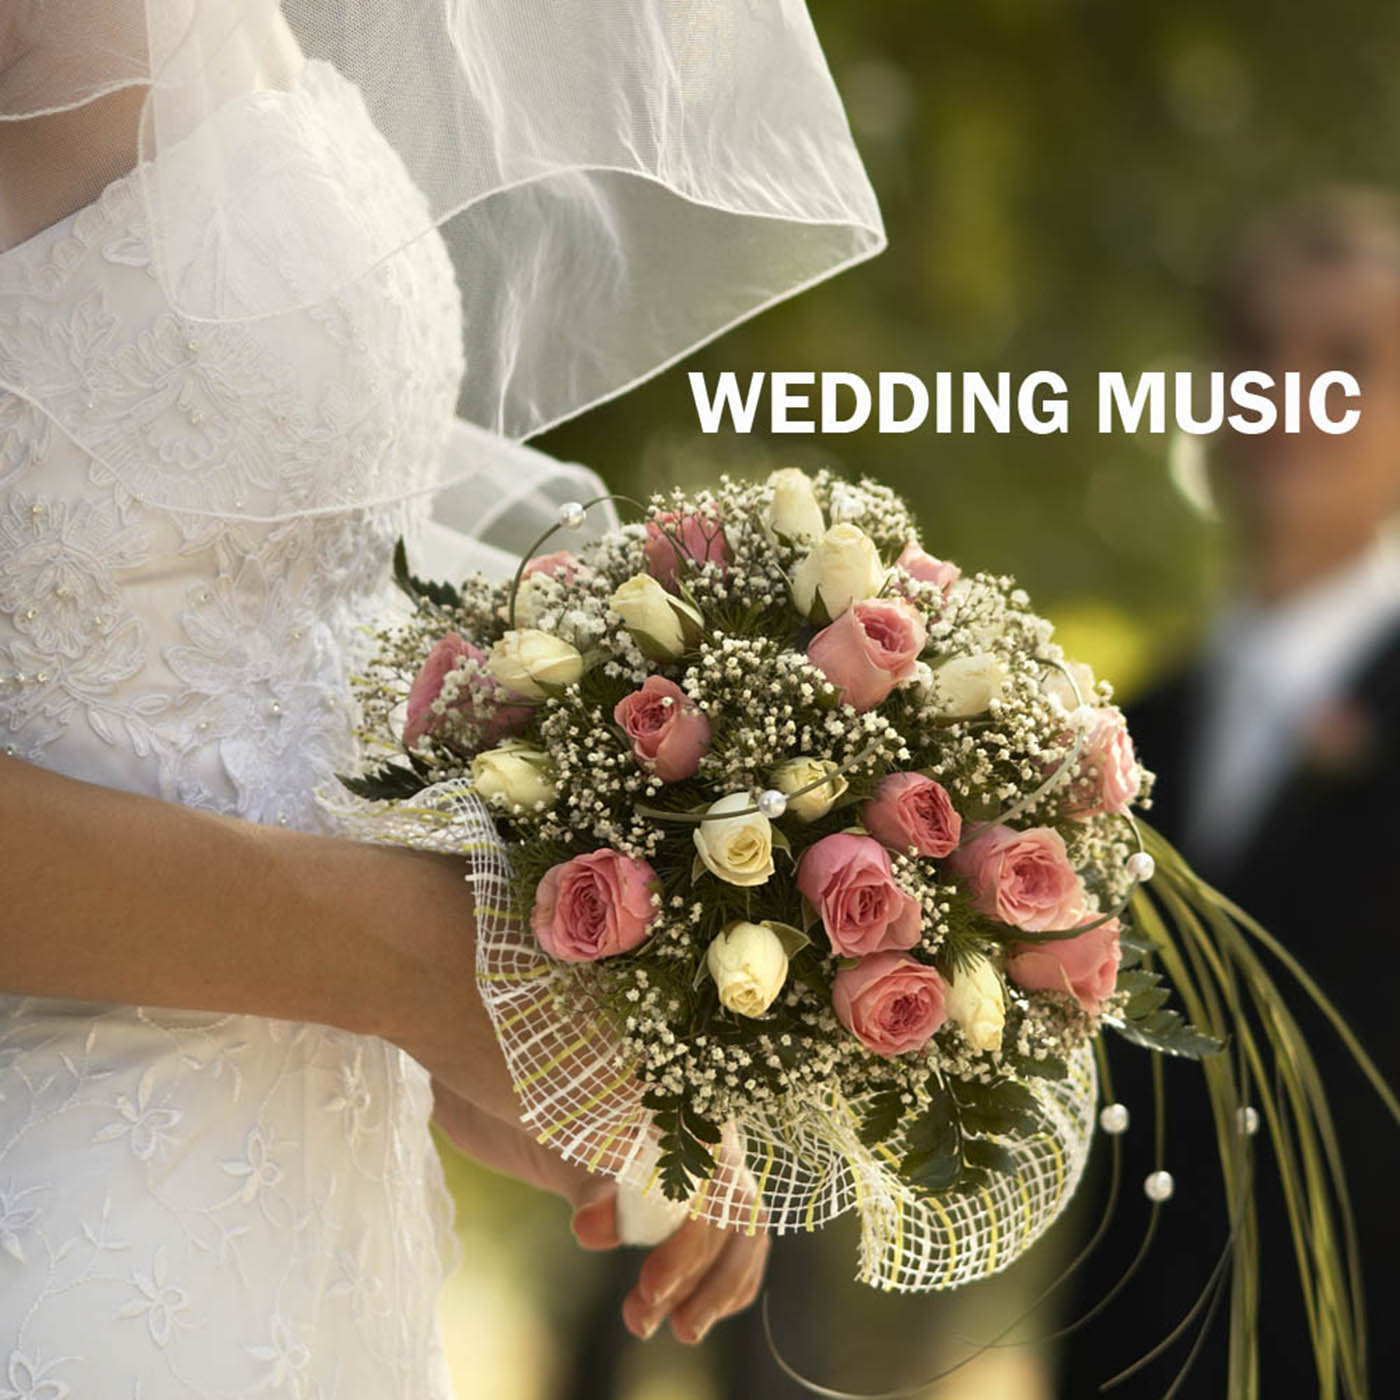 Wedding Music, Guitar Flute Music Duet: Wedding Ceremony Music, Wedding Reception Songs, Background Music for an Elegante Wedding Dinner Party and First Dance Songs